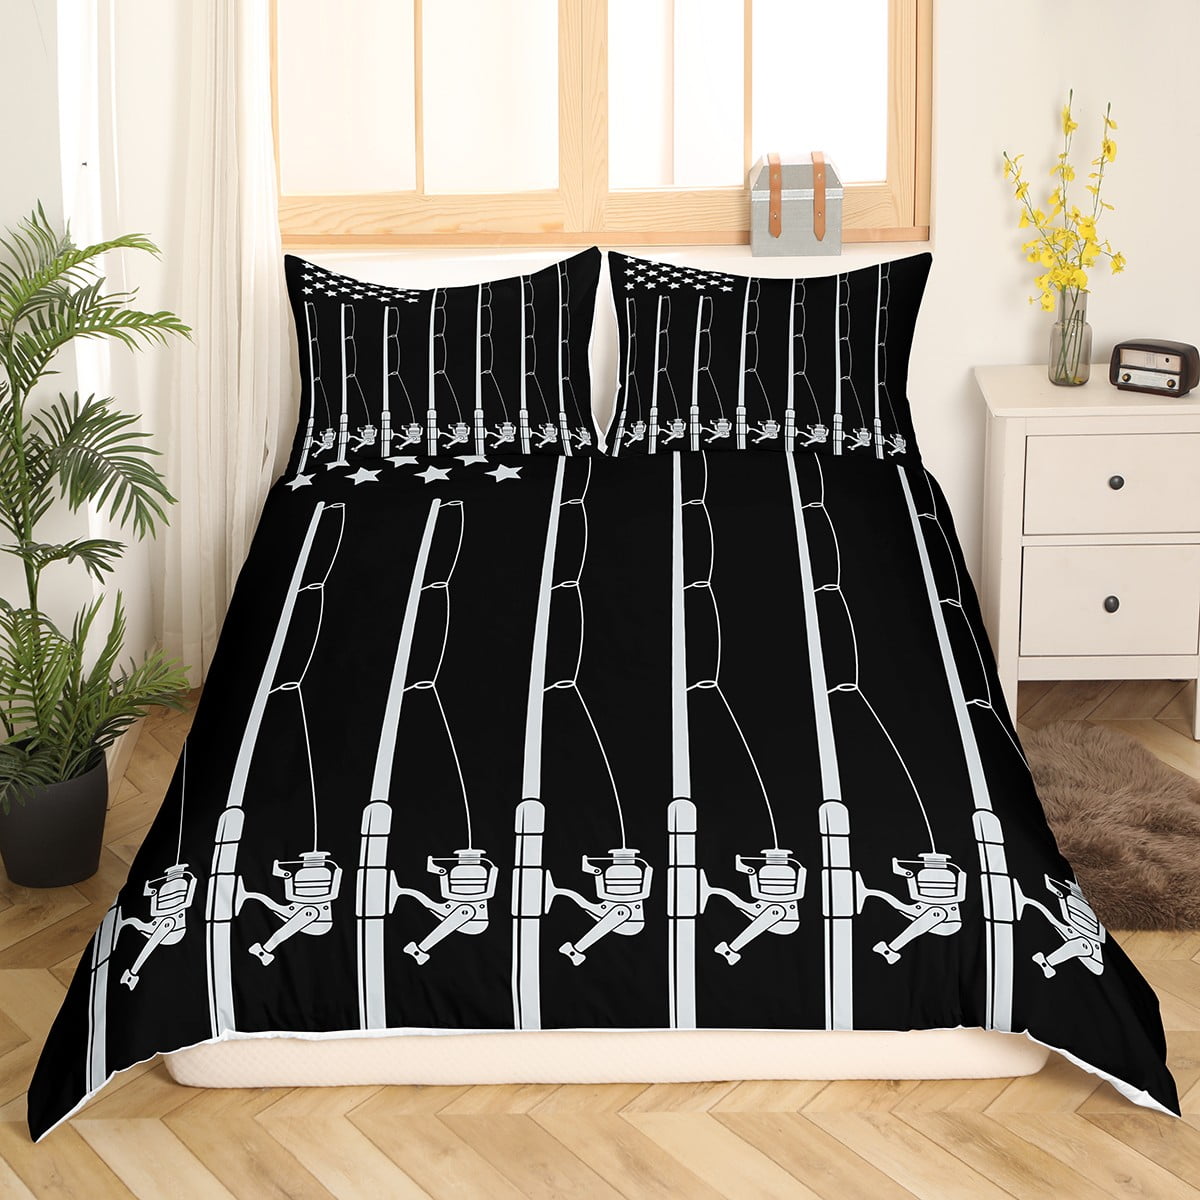 Buy Louis Vuitton Brands 13 Bedding Set Bed Sets With Twin, Full, Queen, King  Size